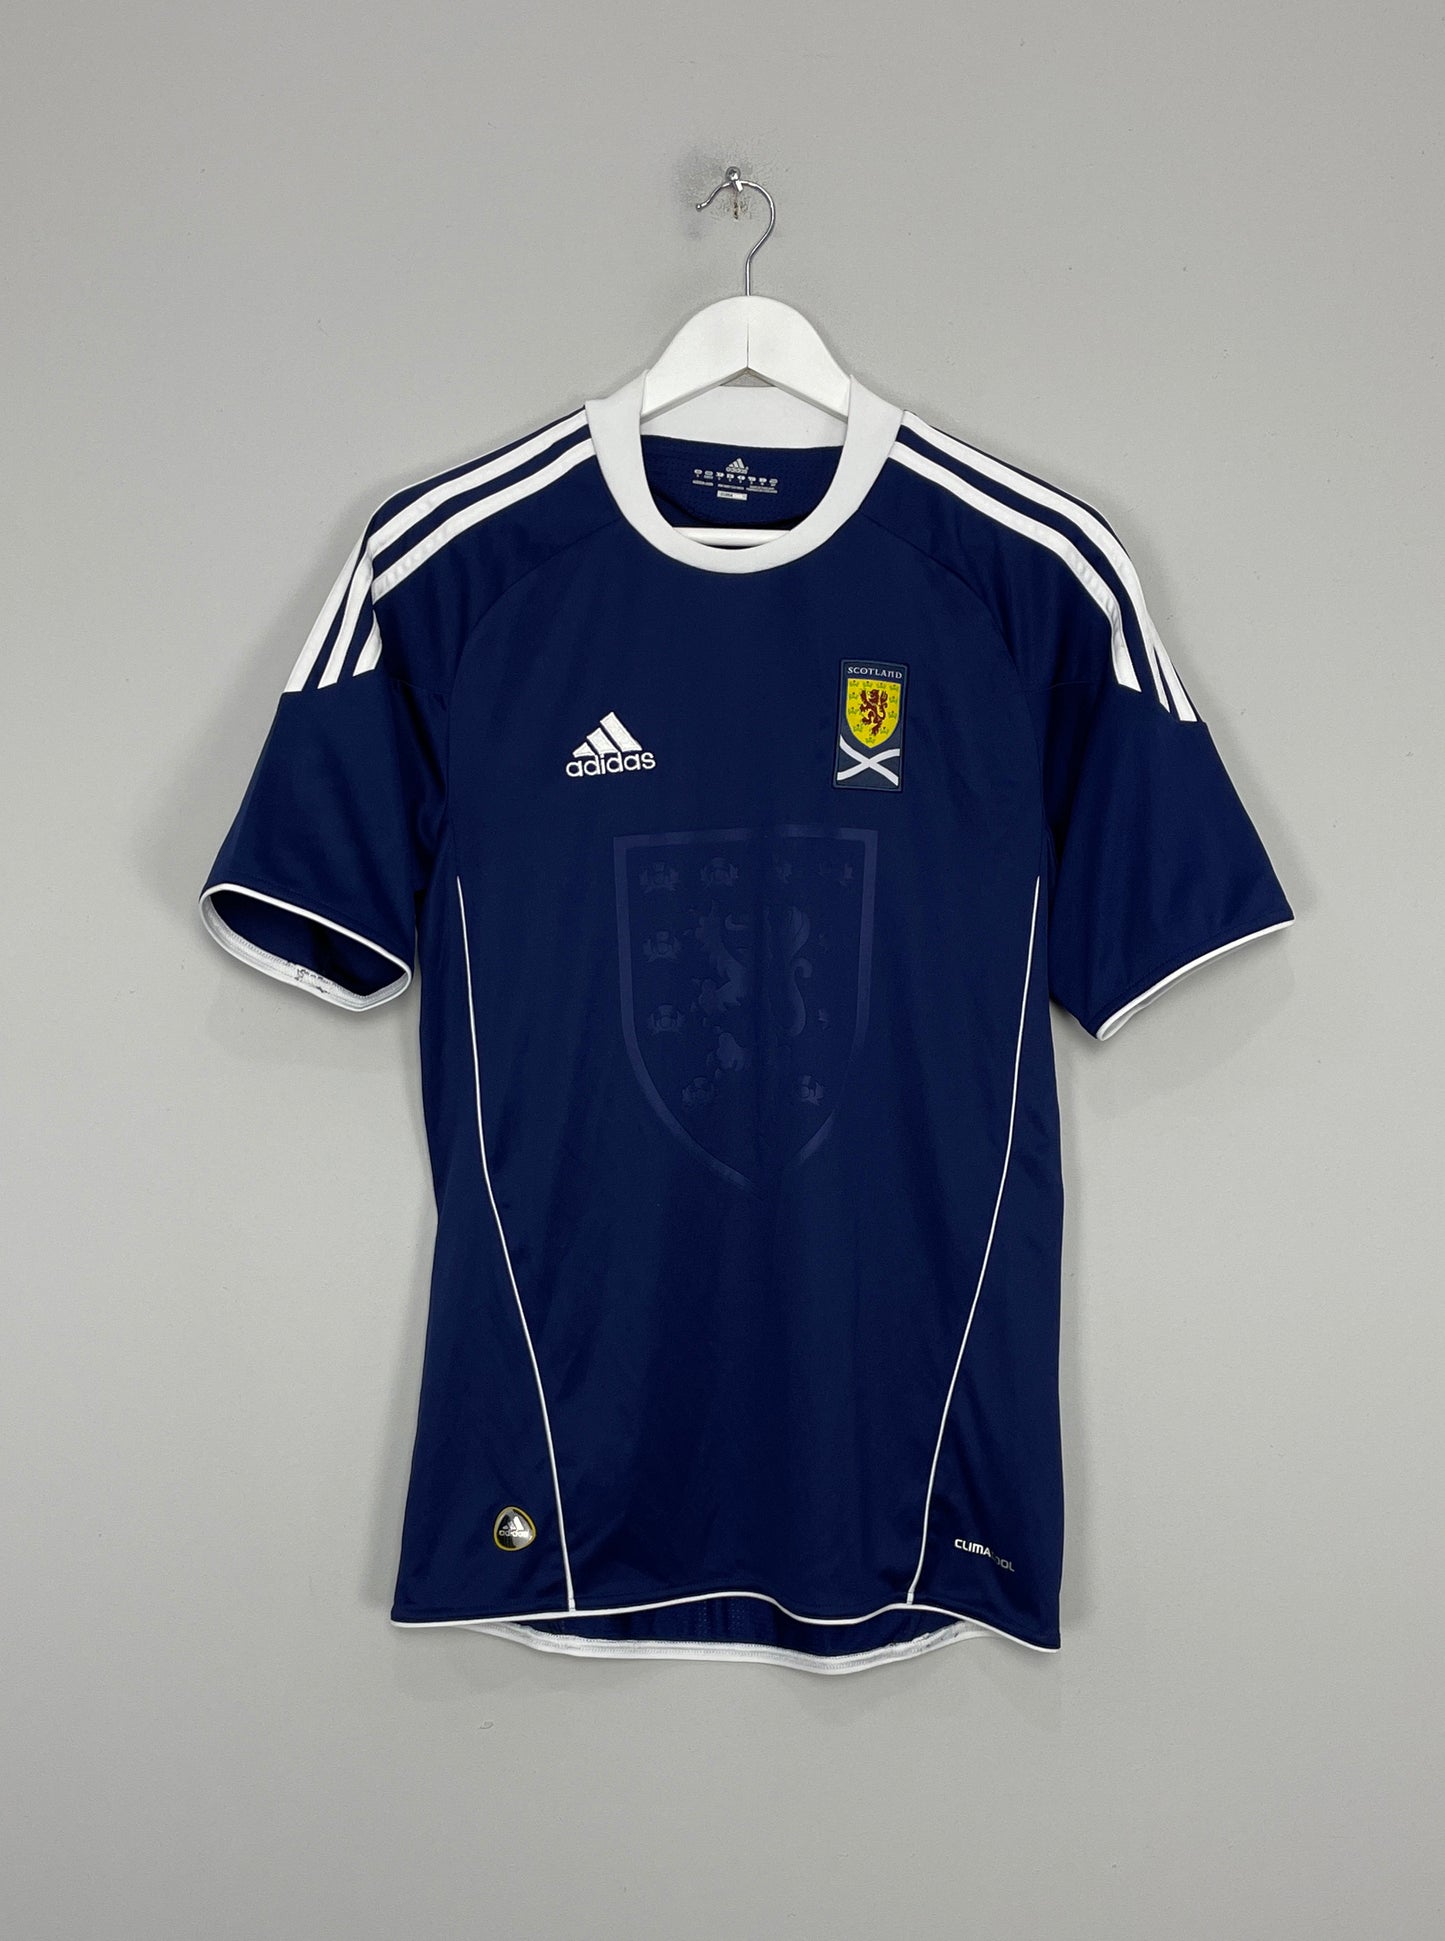 Image of the Scotland shirt from the 2010/11 season